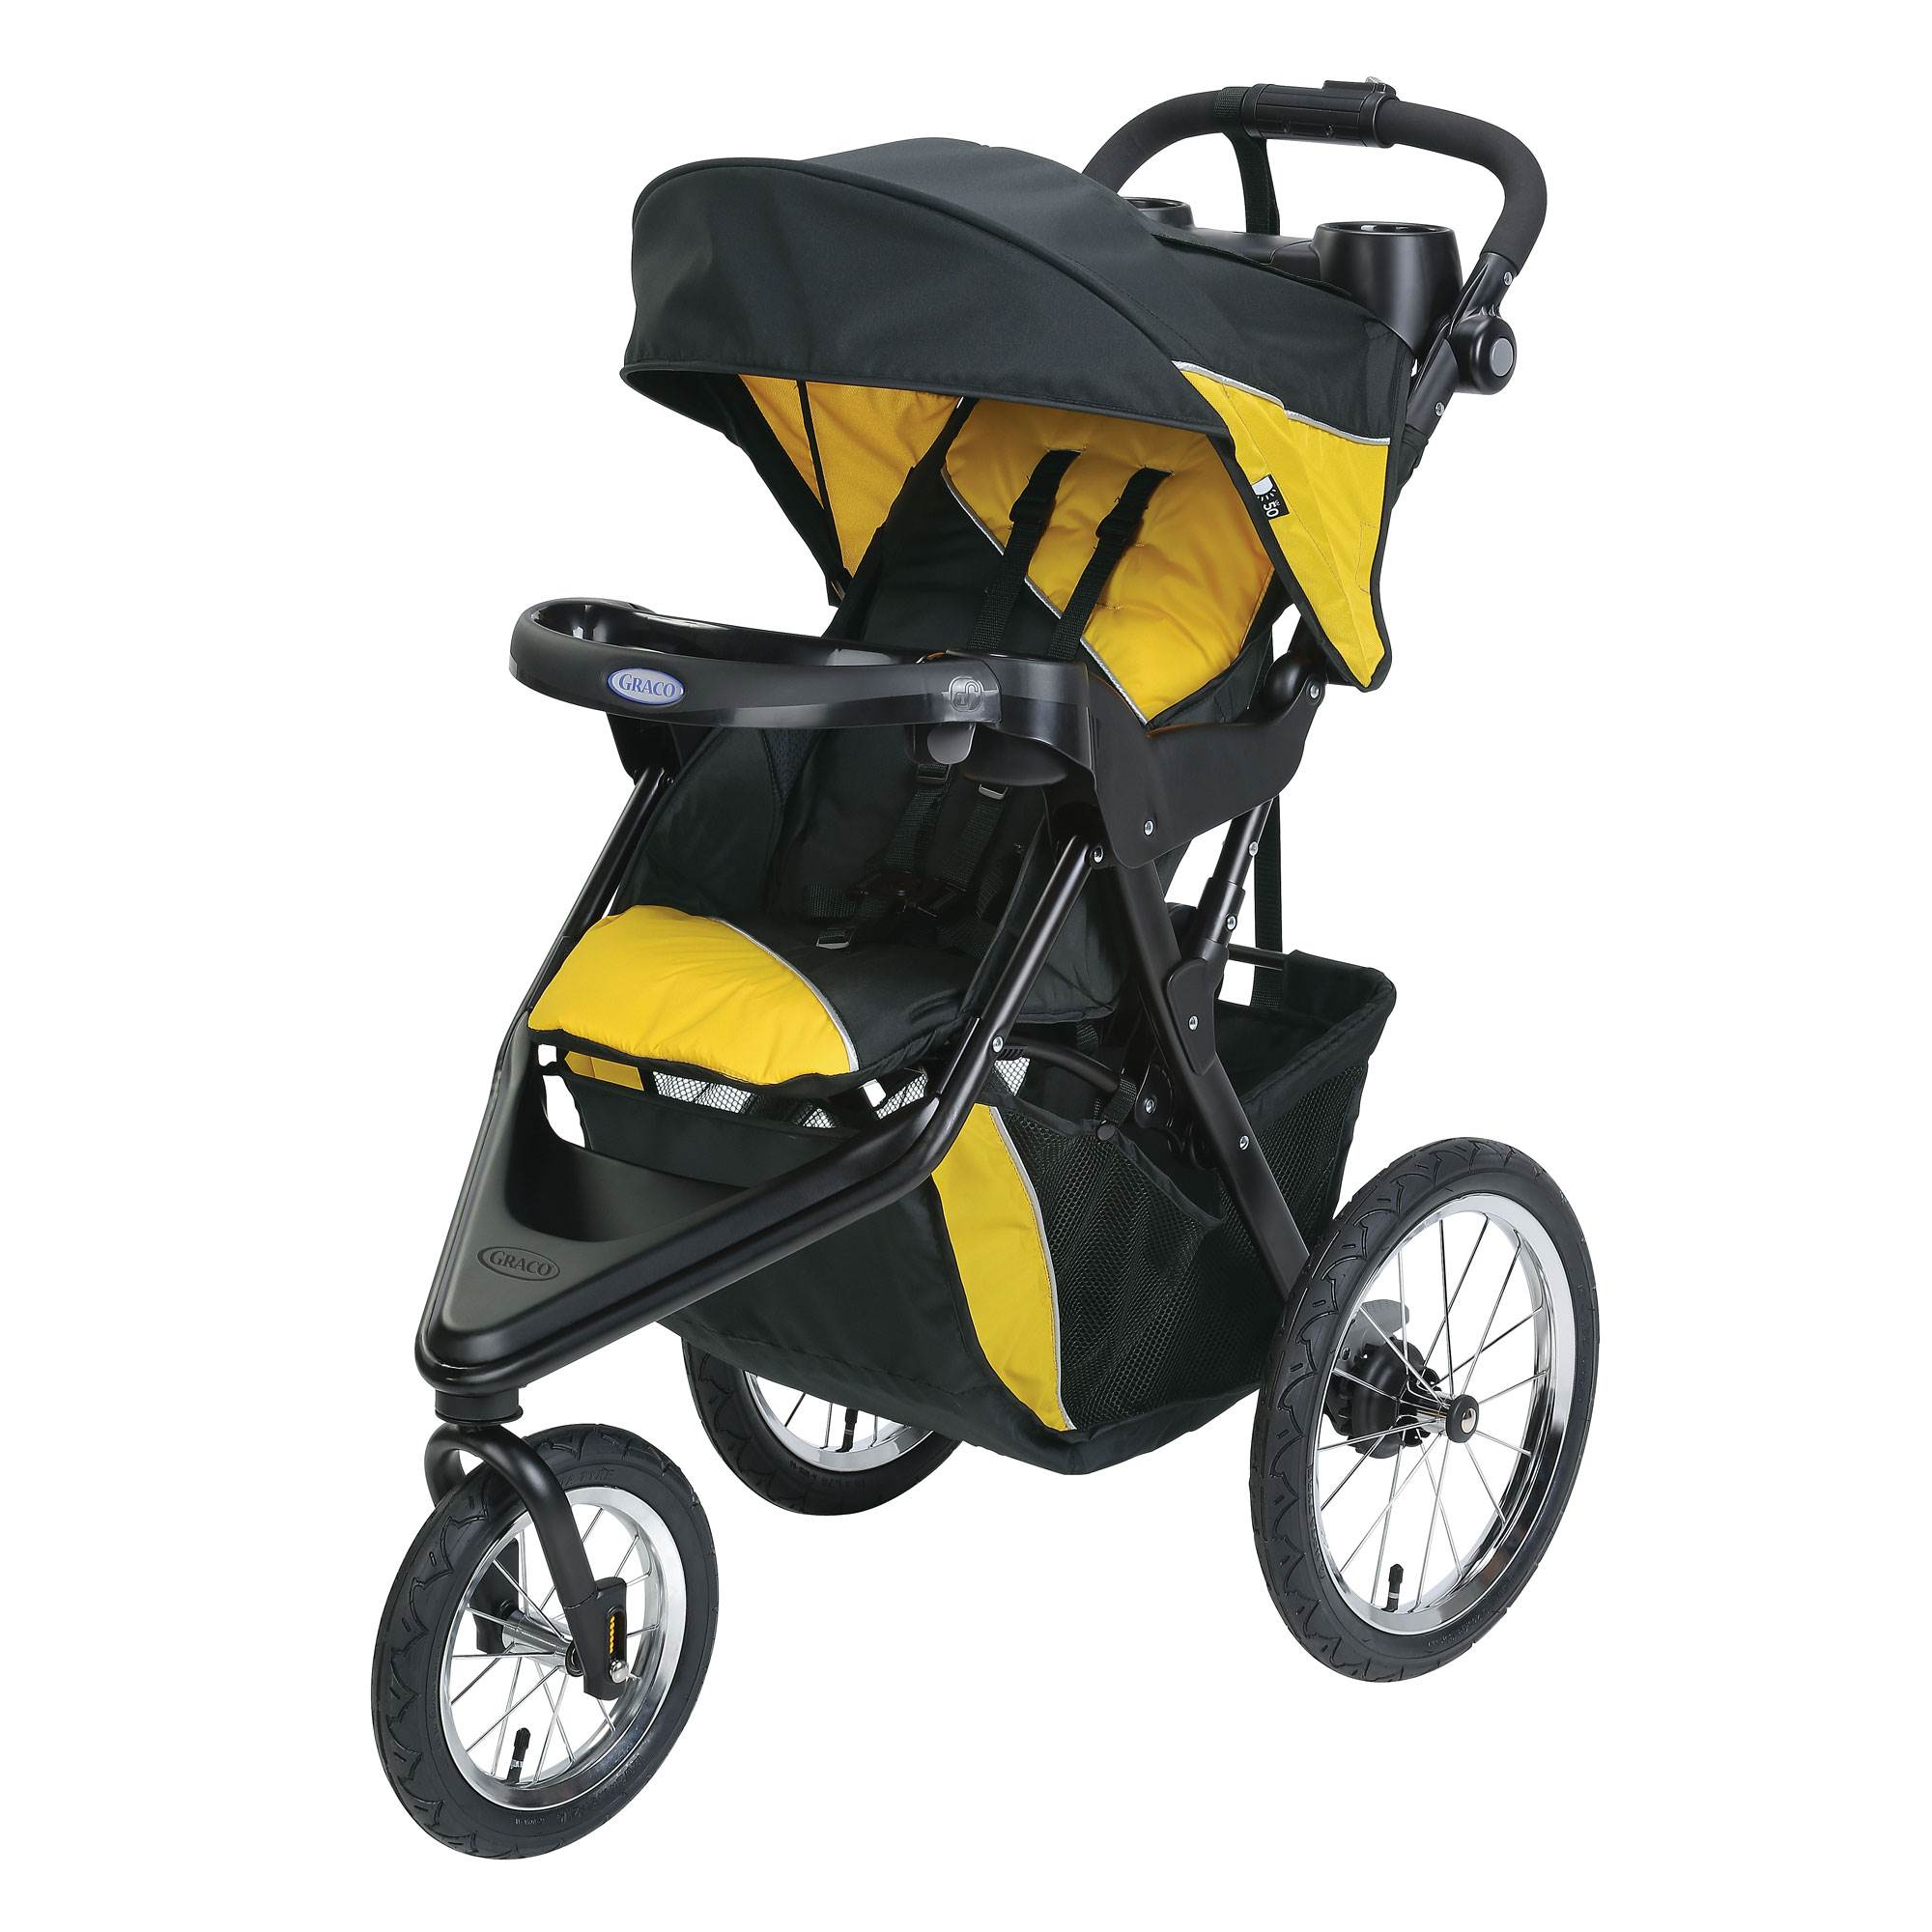 graco trax jogger travel system with snugride 30